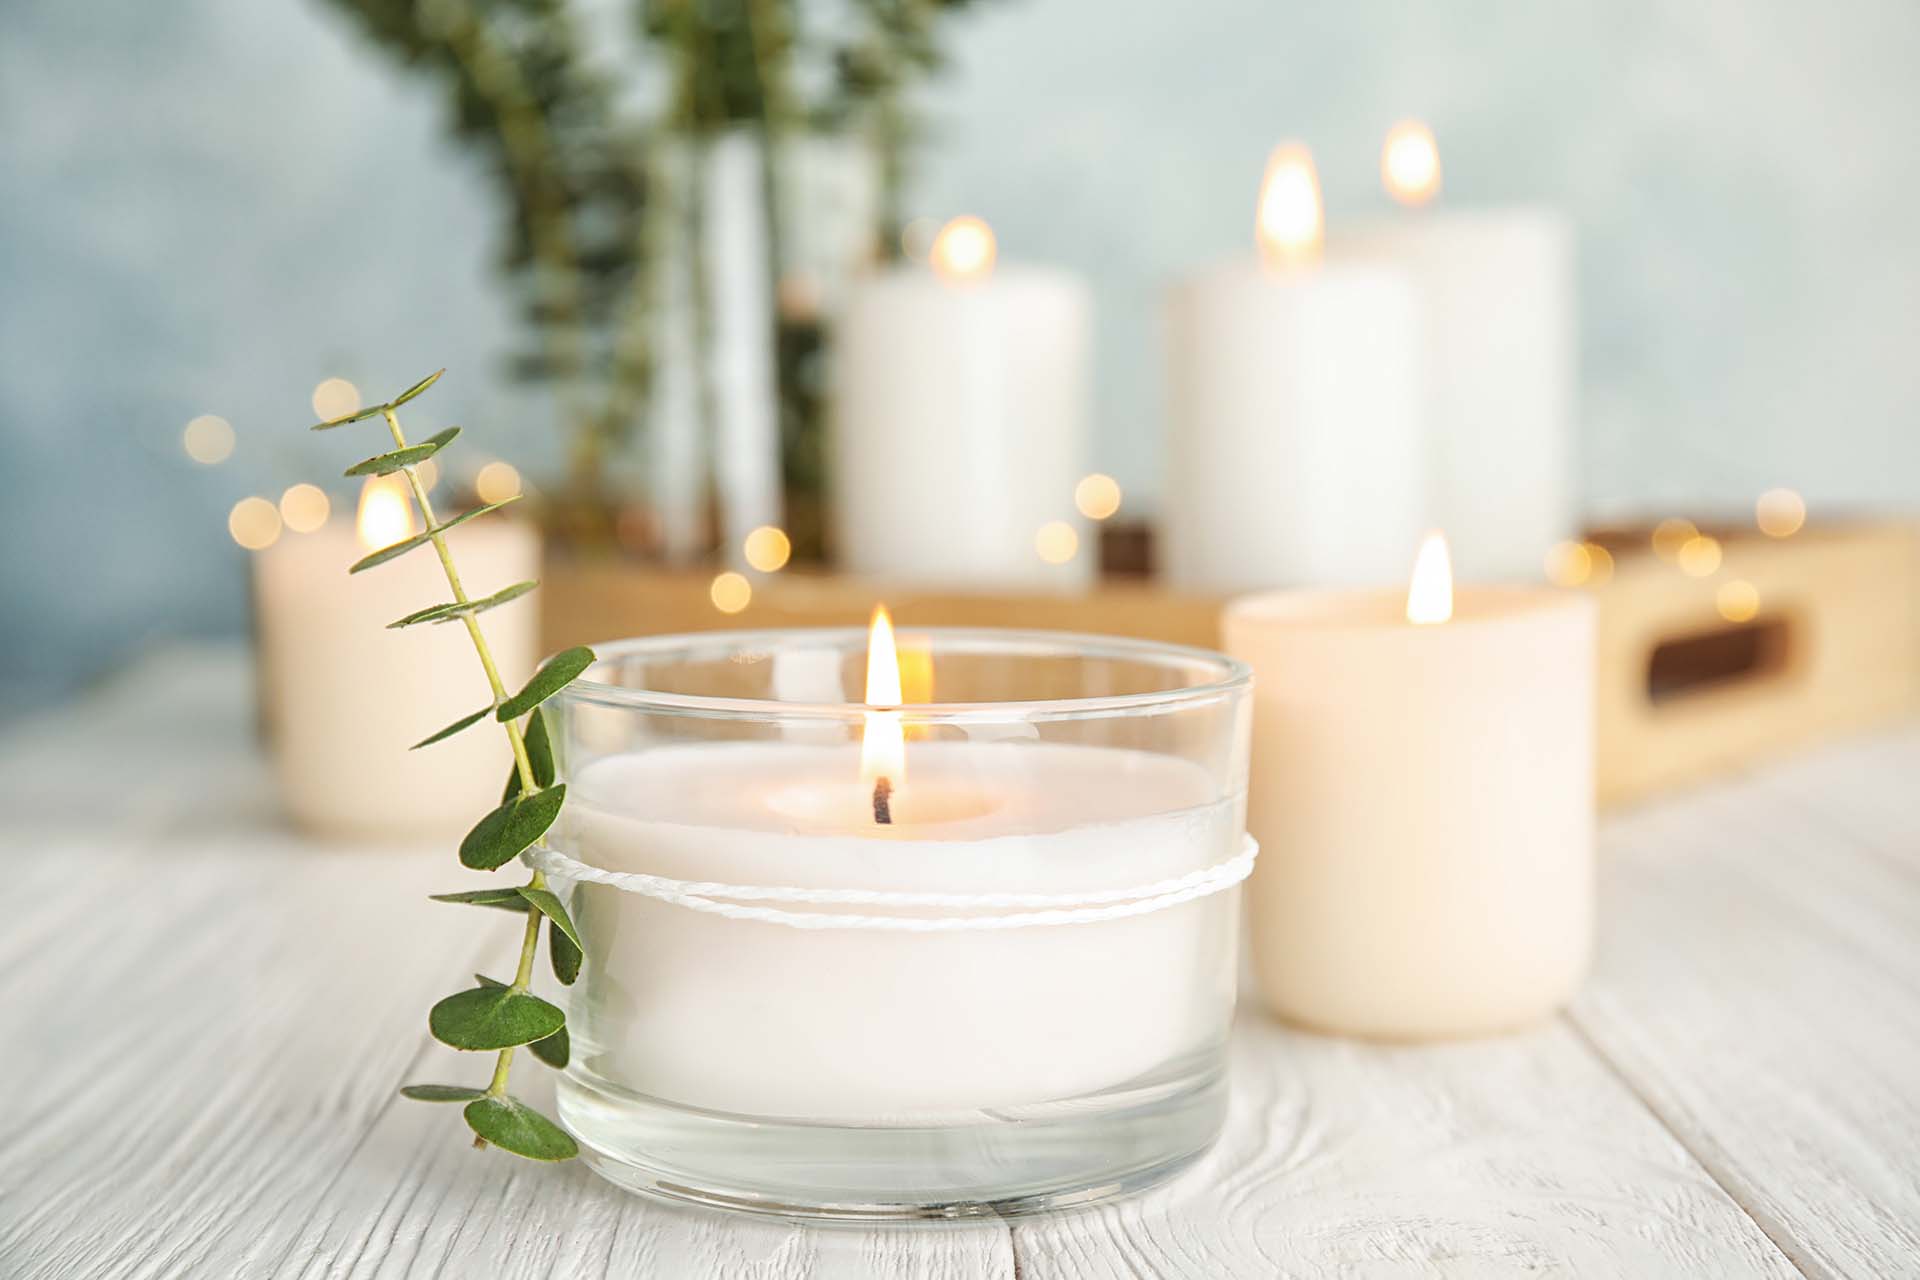 Product Photography Tips: a staged photo of candles which are lit, serne calm and relaxing story told in the image